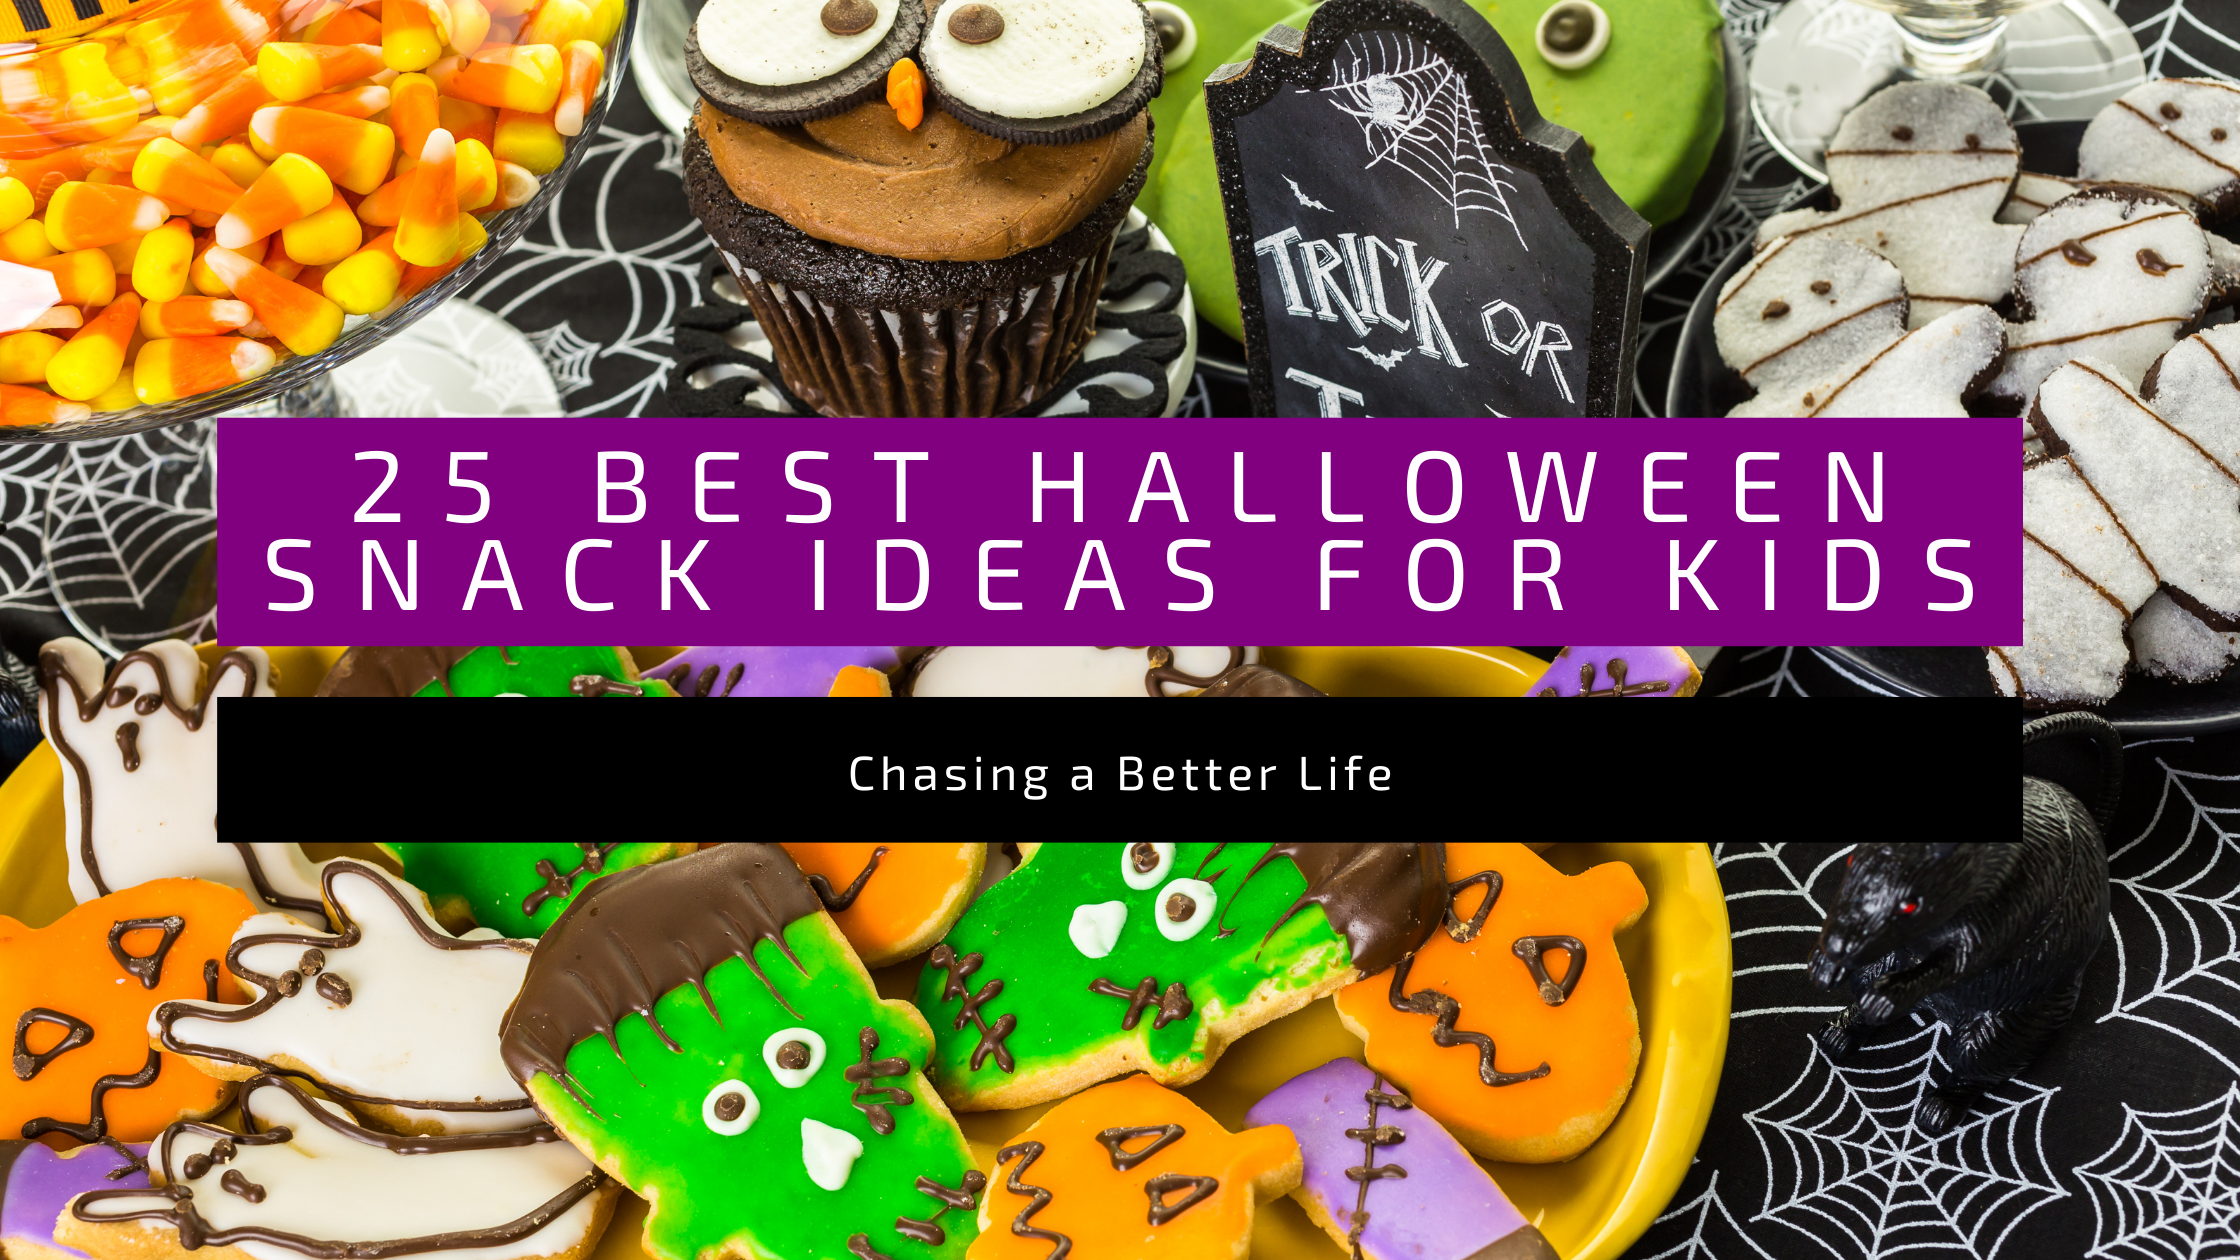 The 25 Best Halloween Snack Ideas for Kids 97